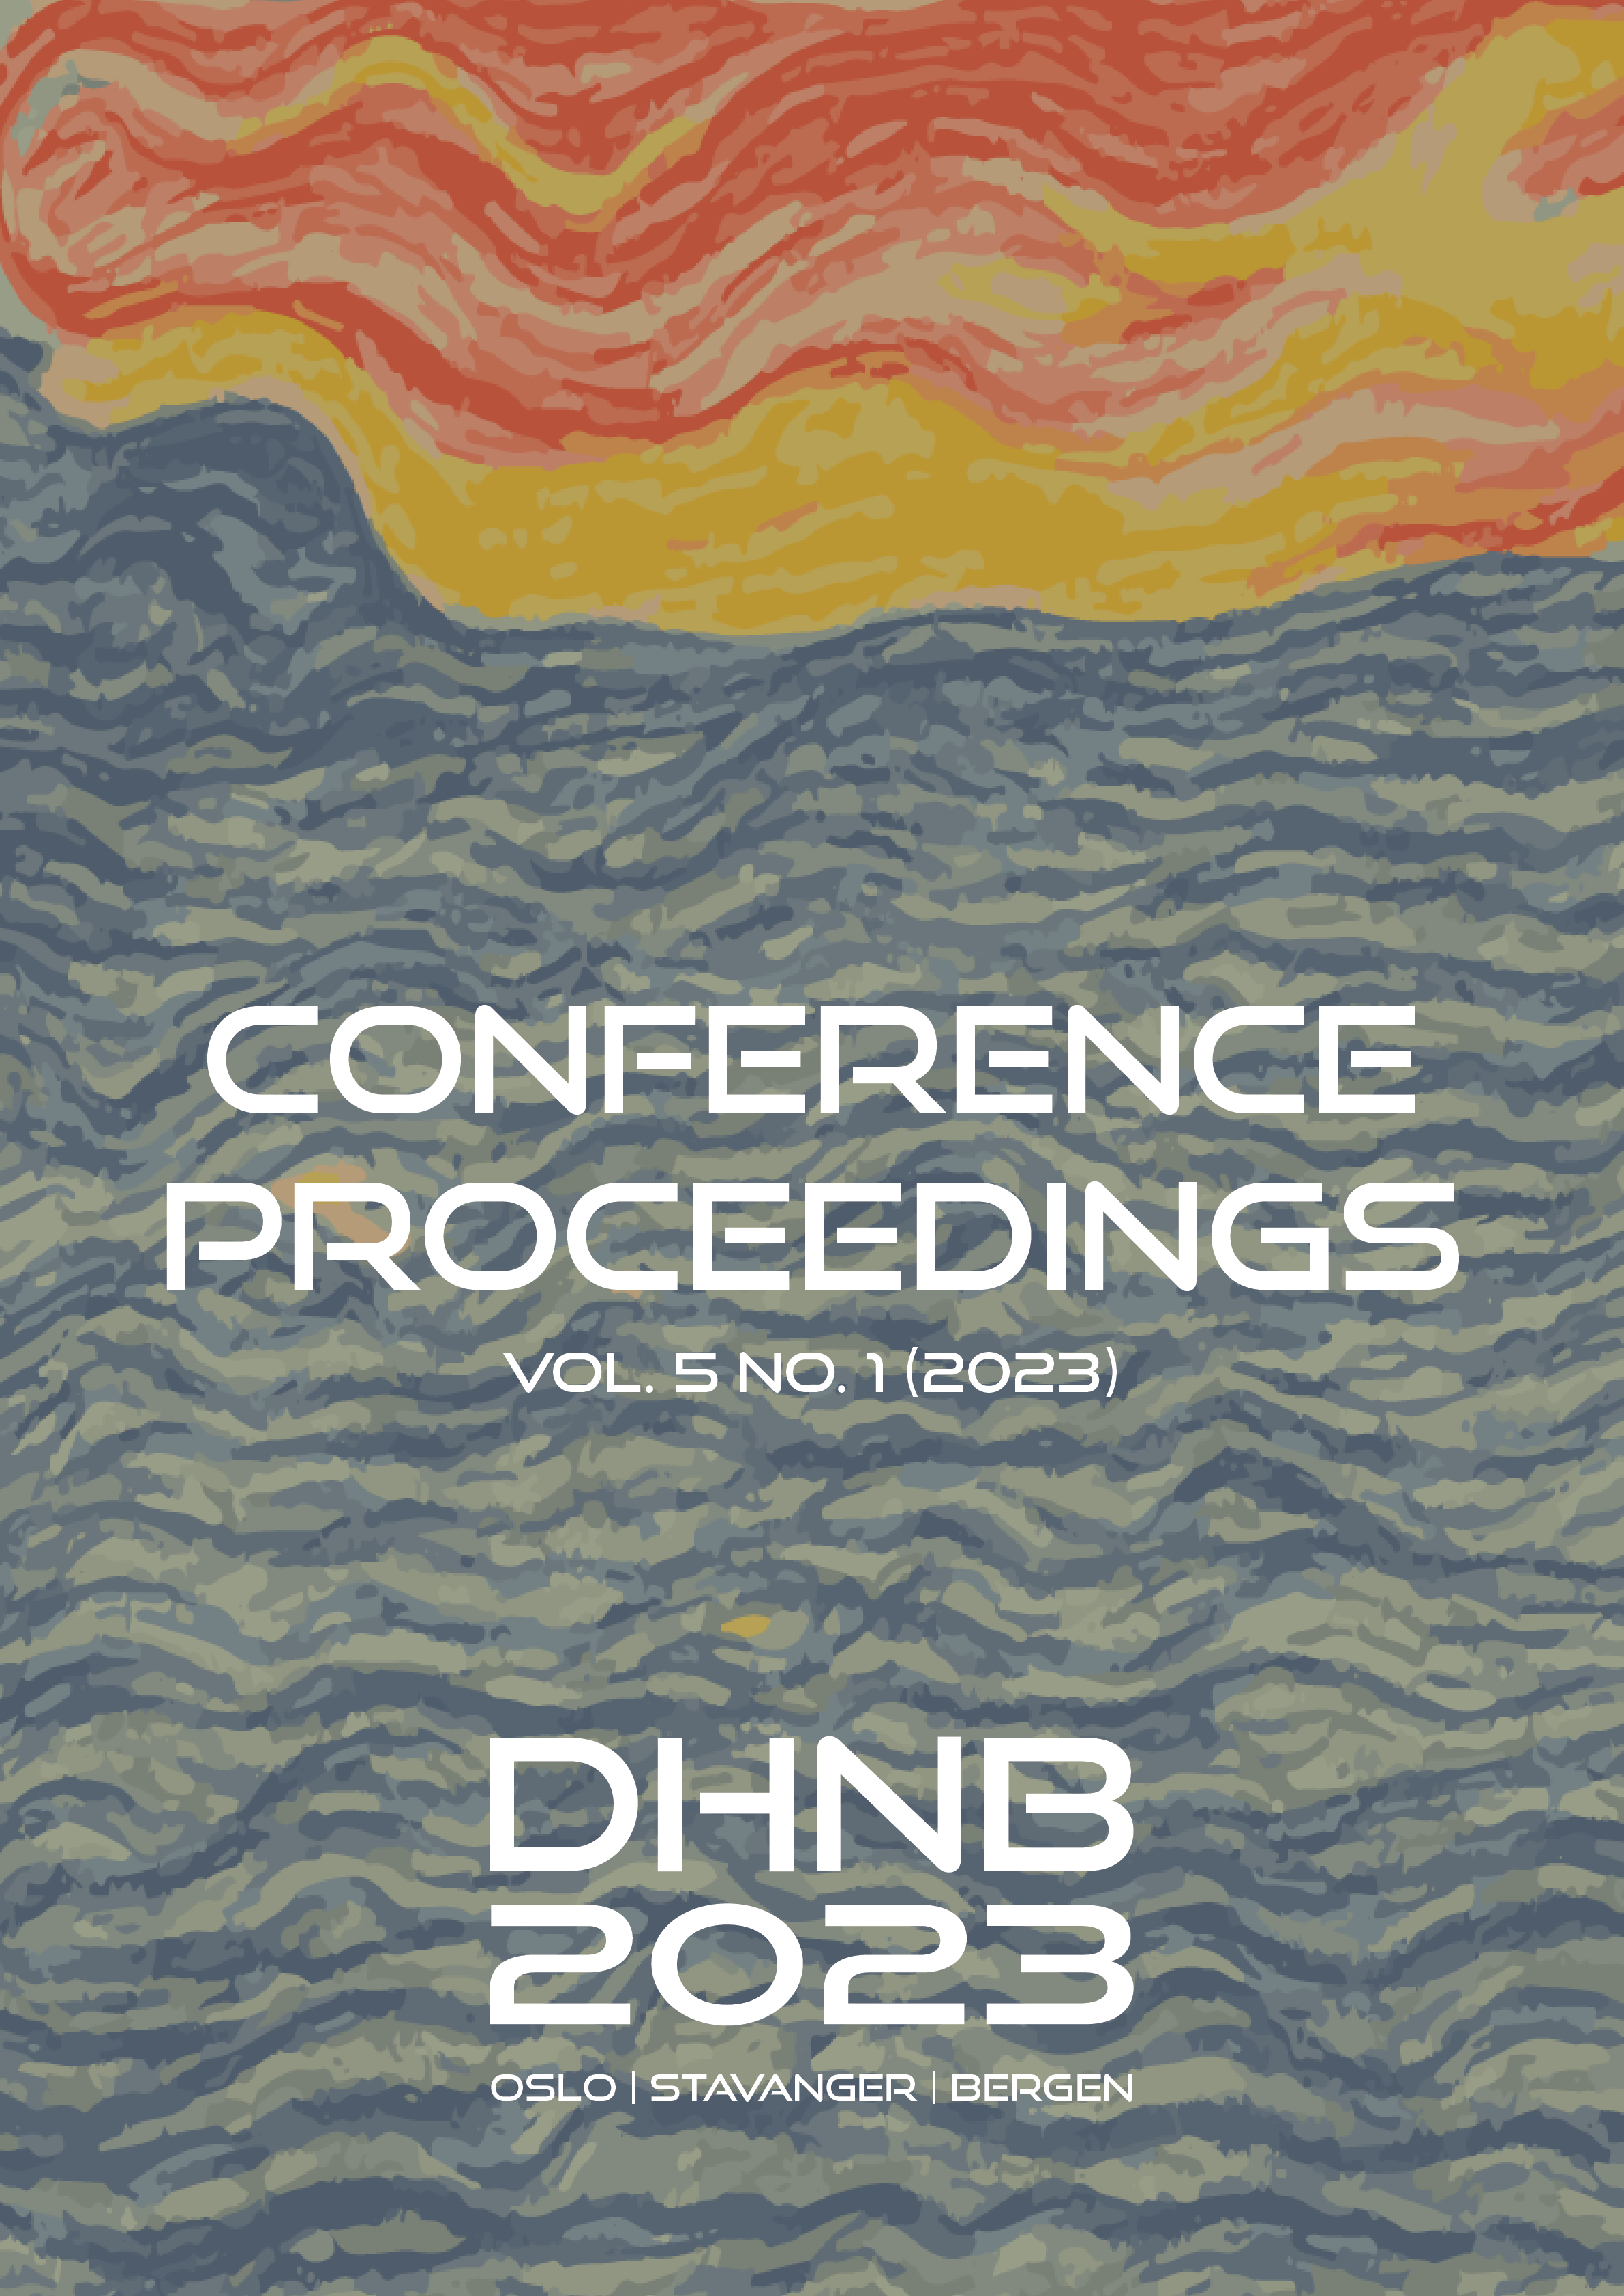 2023 Conference Proceedings cover image, including title of the conference and a background featuring a painting of the ocean and sky.